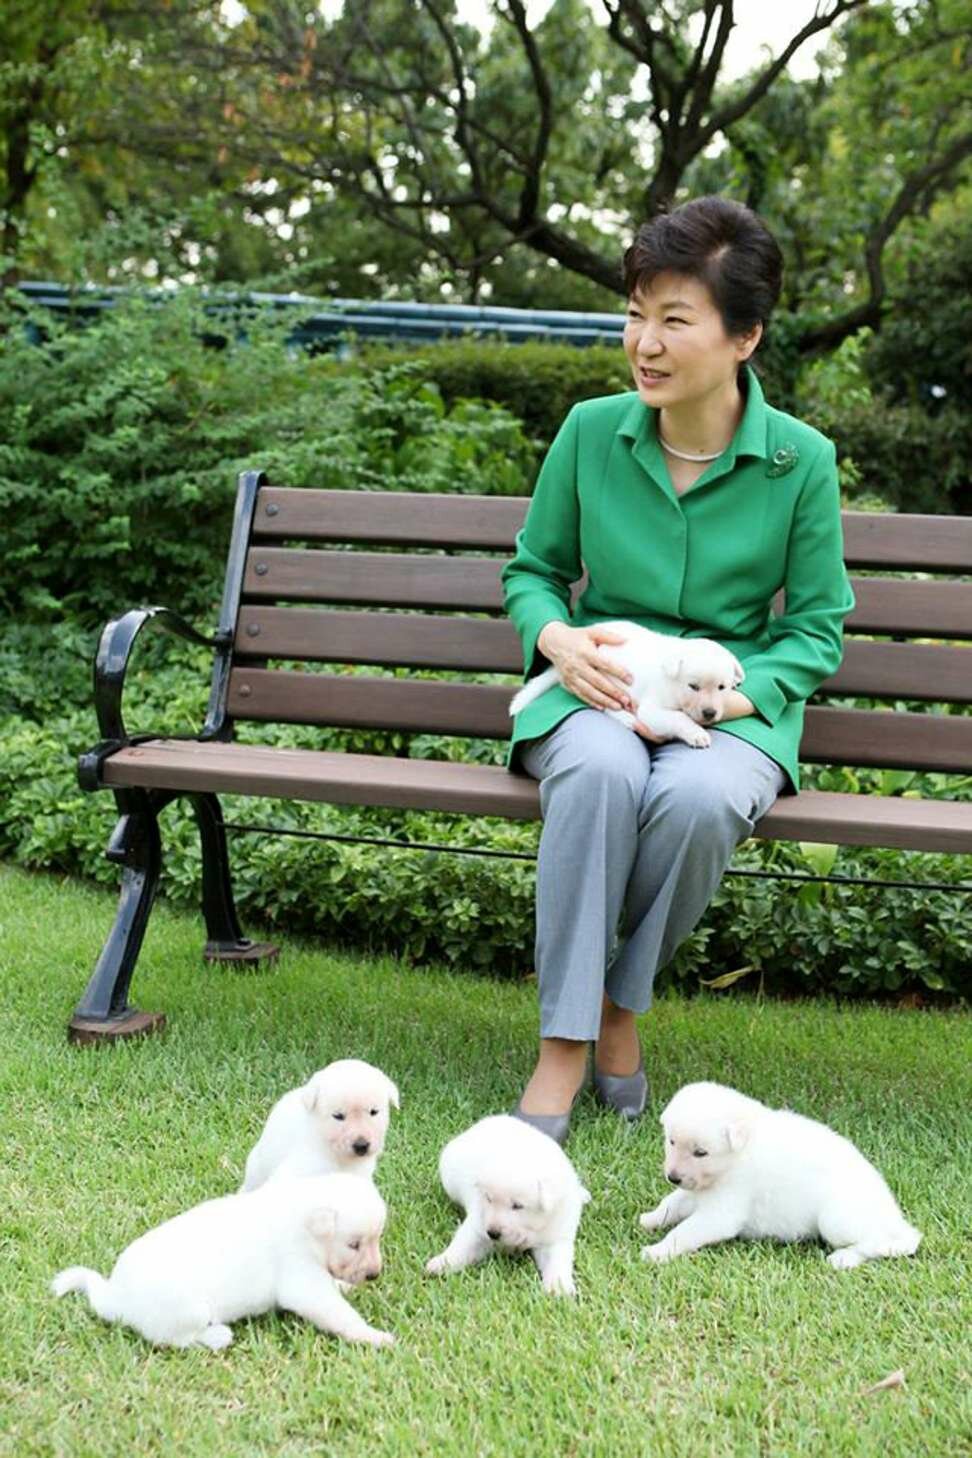 South Korea's former president Park Geun-hye and her pet dogs are seen in this handout picture provided by the Presidential Blue House and released by News1 on September 20, 2015. The Presidential Blue House/News1 via REUTERS ATTENTION EDITORS - THIS IMAGE HAS BEEN SUPPLIED BY A THIRD PARTY. SOUTH KOREA OUT. FOR EDITORIAL USE ONLY. NO RESALES. NO ARCHIVE.